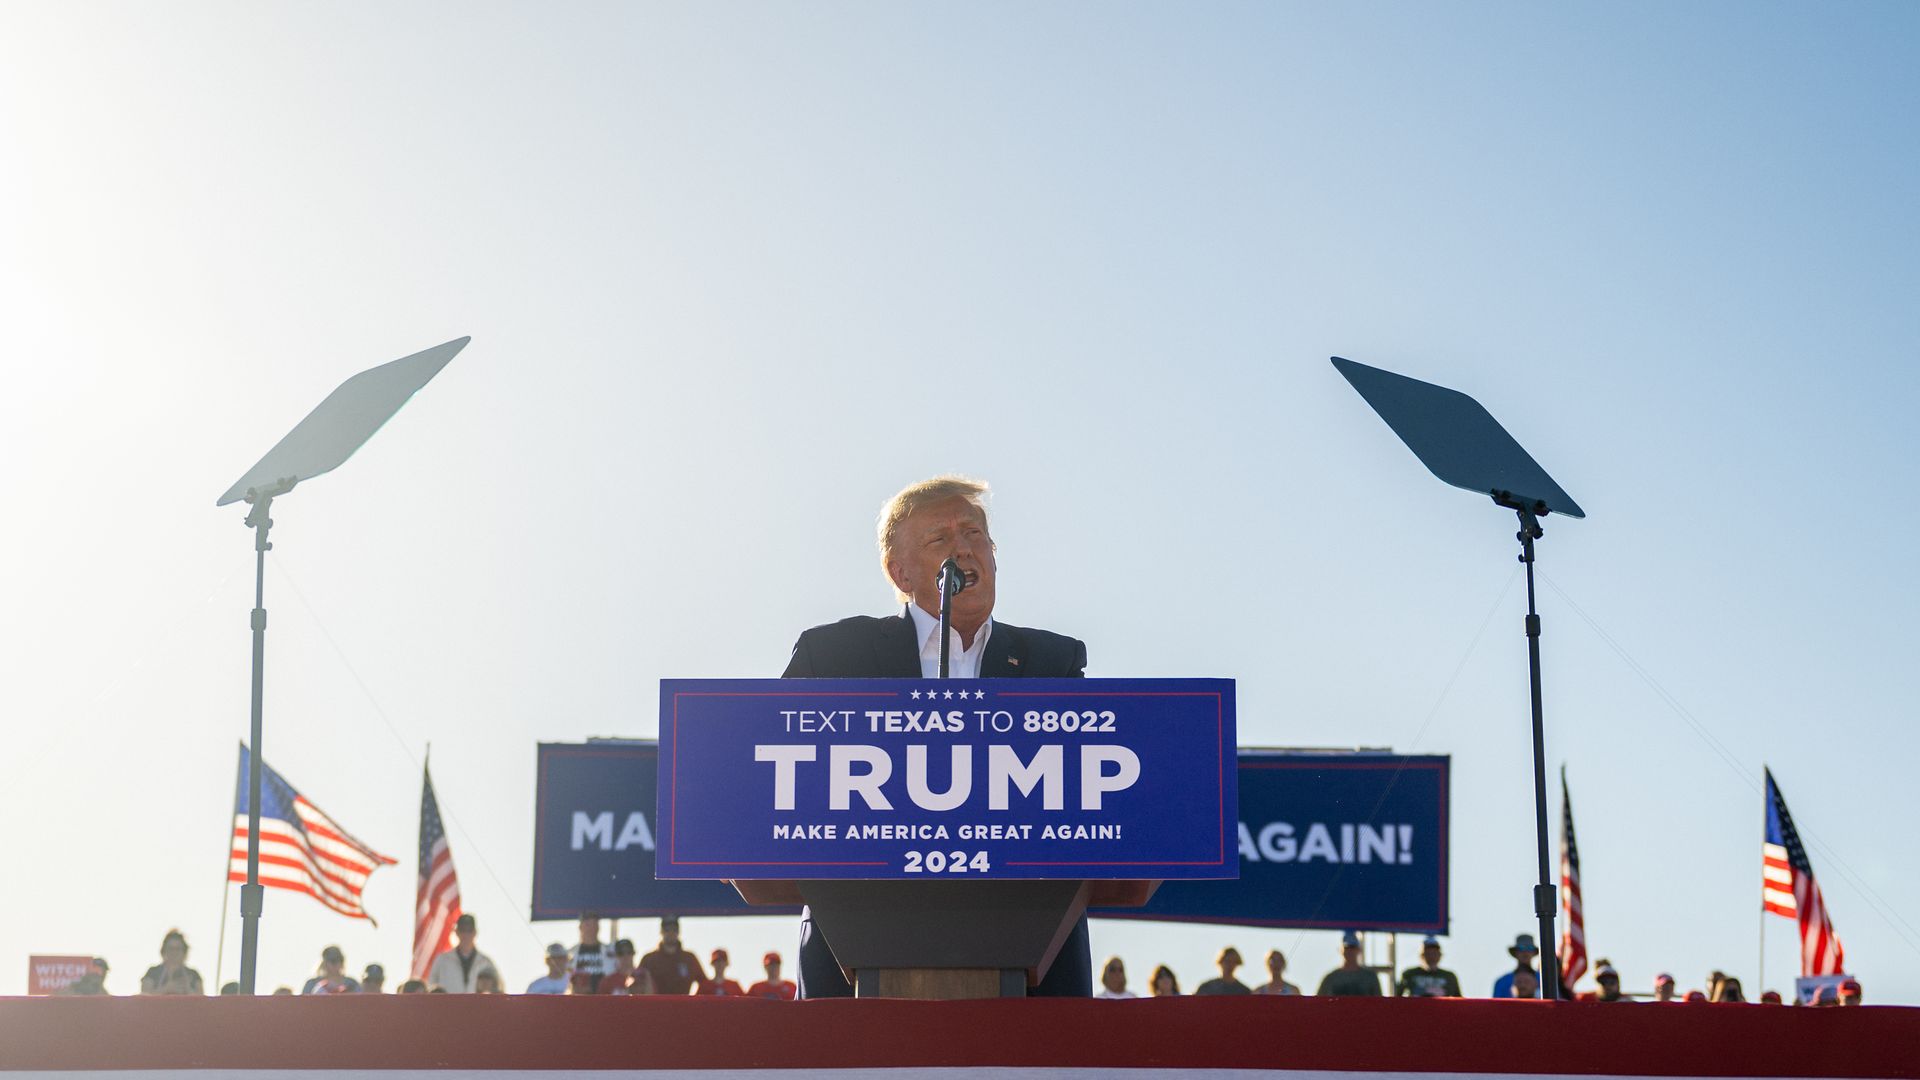 Former U.S. President Donald Trump speaks during a rally at the Waco Regional Airport on March 25, 2023 in Waco, Texas.